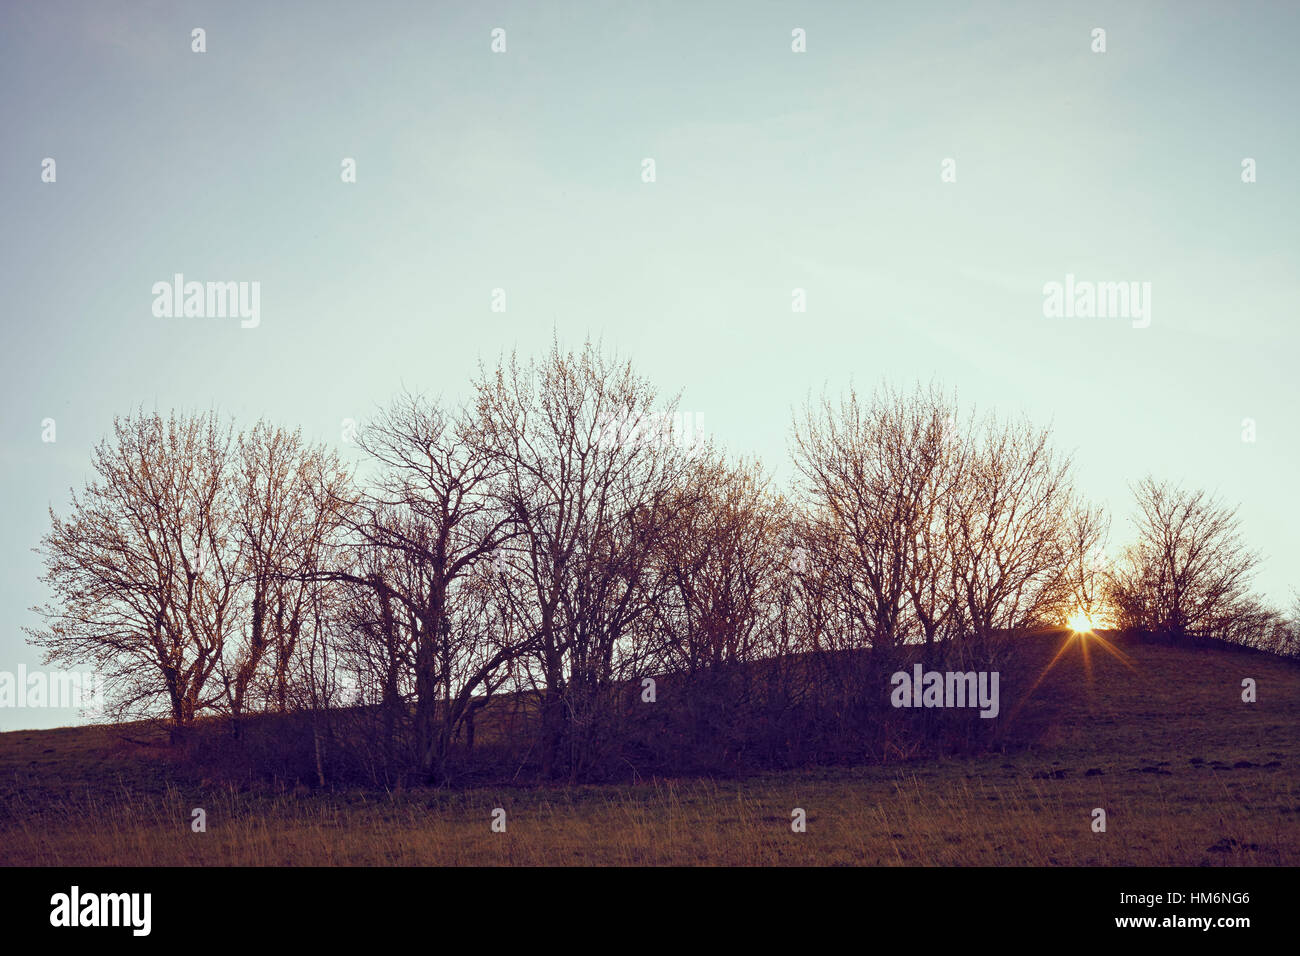 Trees, side by side in a row, branches, sun shining in backlight Stock Photo